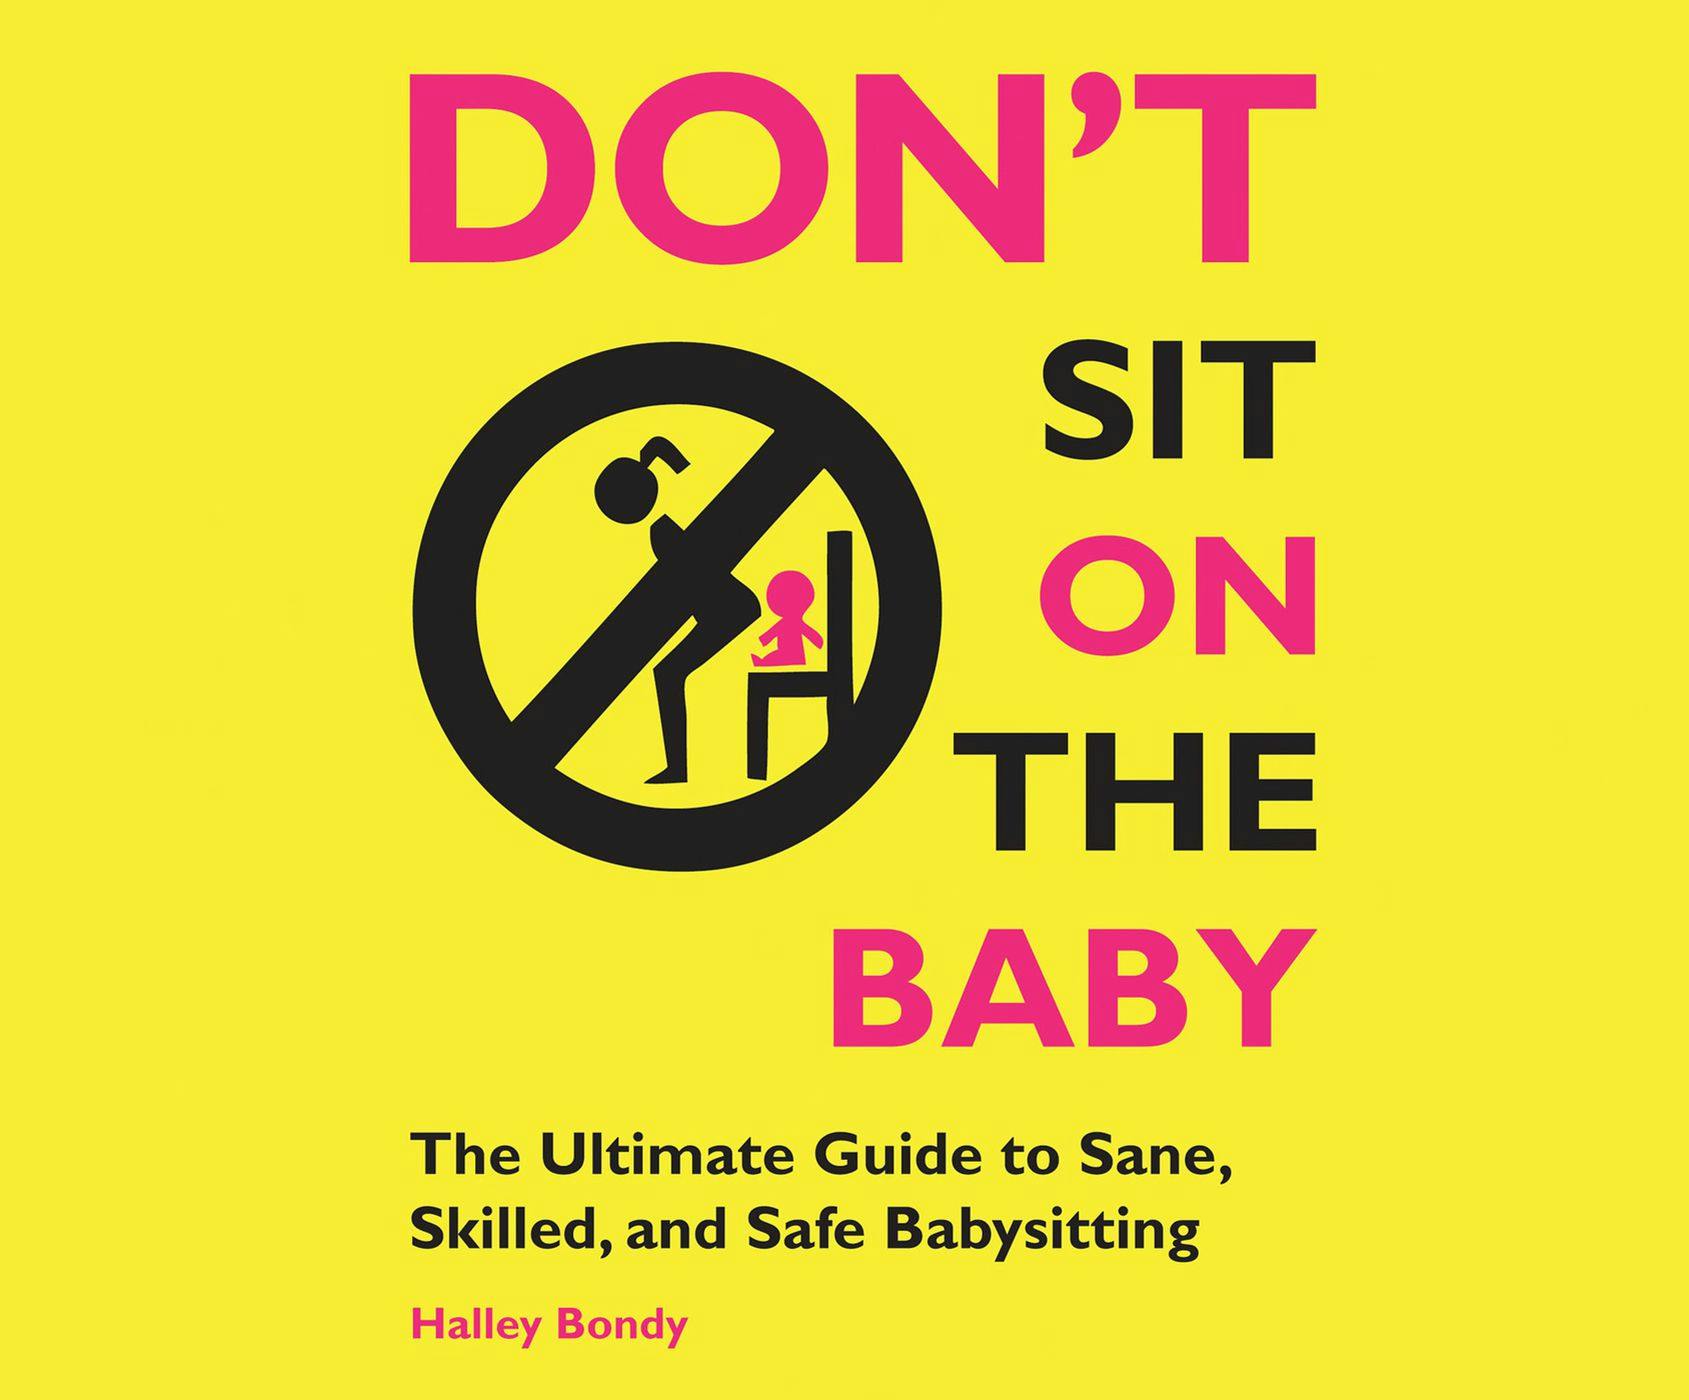 Don't Sit On the Baby! - The Ultimate Guide to Sane, Skilled, and Safe Babysitting (Unabridged) - undefined